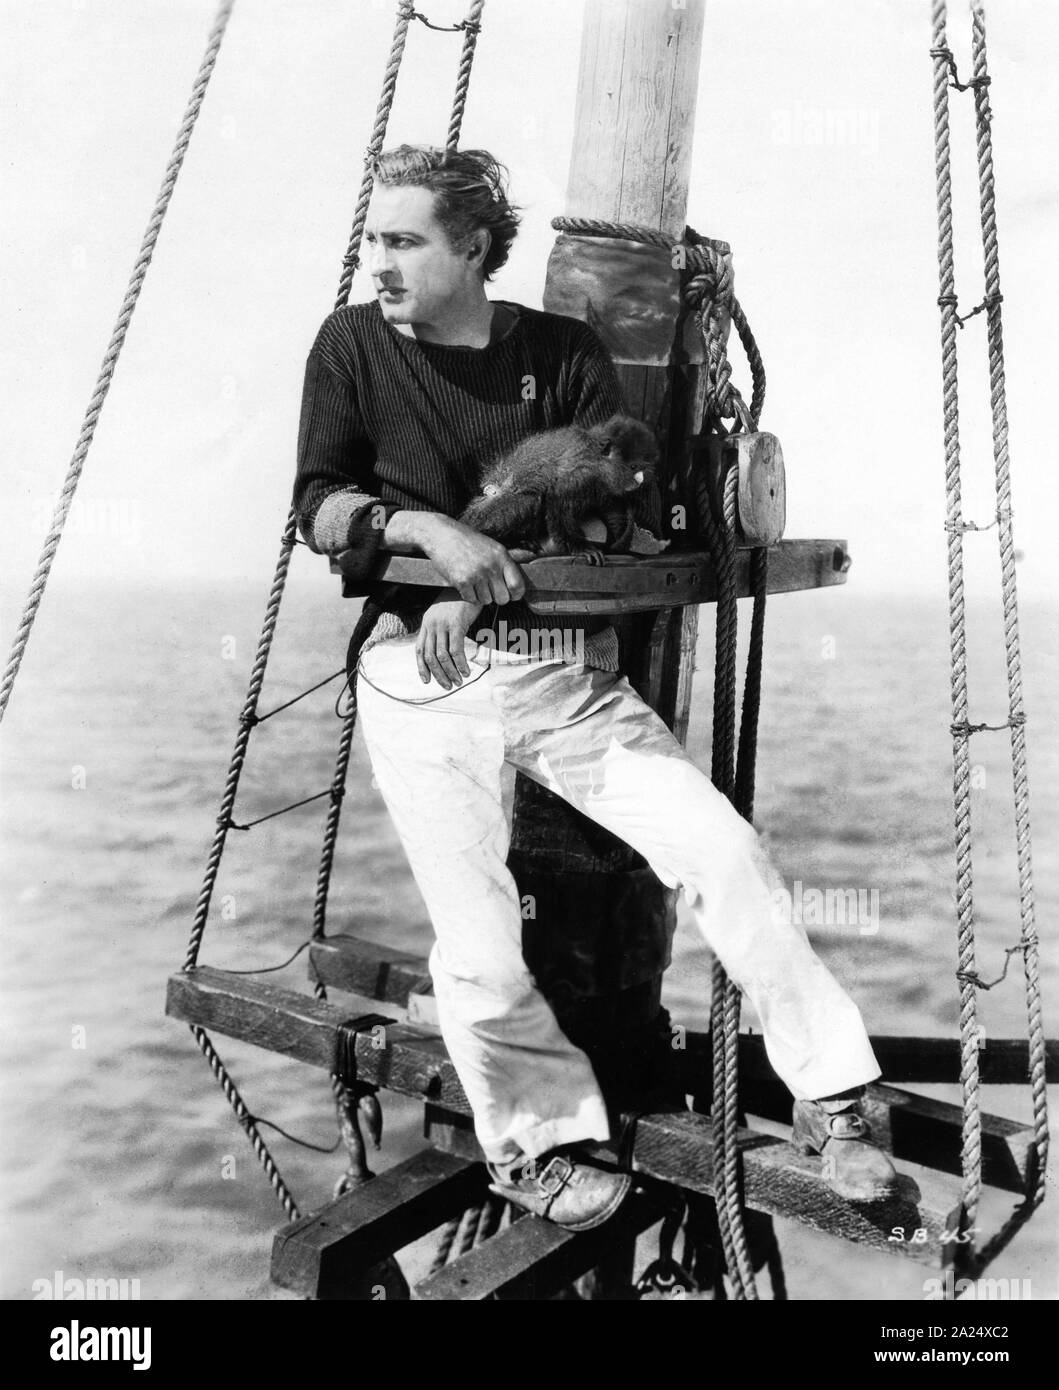 JOHN BARRYMORE young romantic portrait as Captain Ahab with his own pet monkey Clementine in THE SEA BEAST 1926 director Millard Webb loosely based on novel by Herman Melville silent movie Warner Bros. Stock Photo